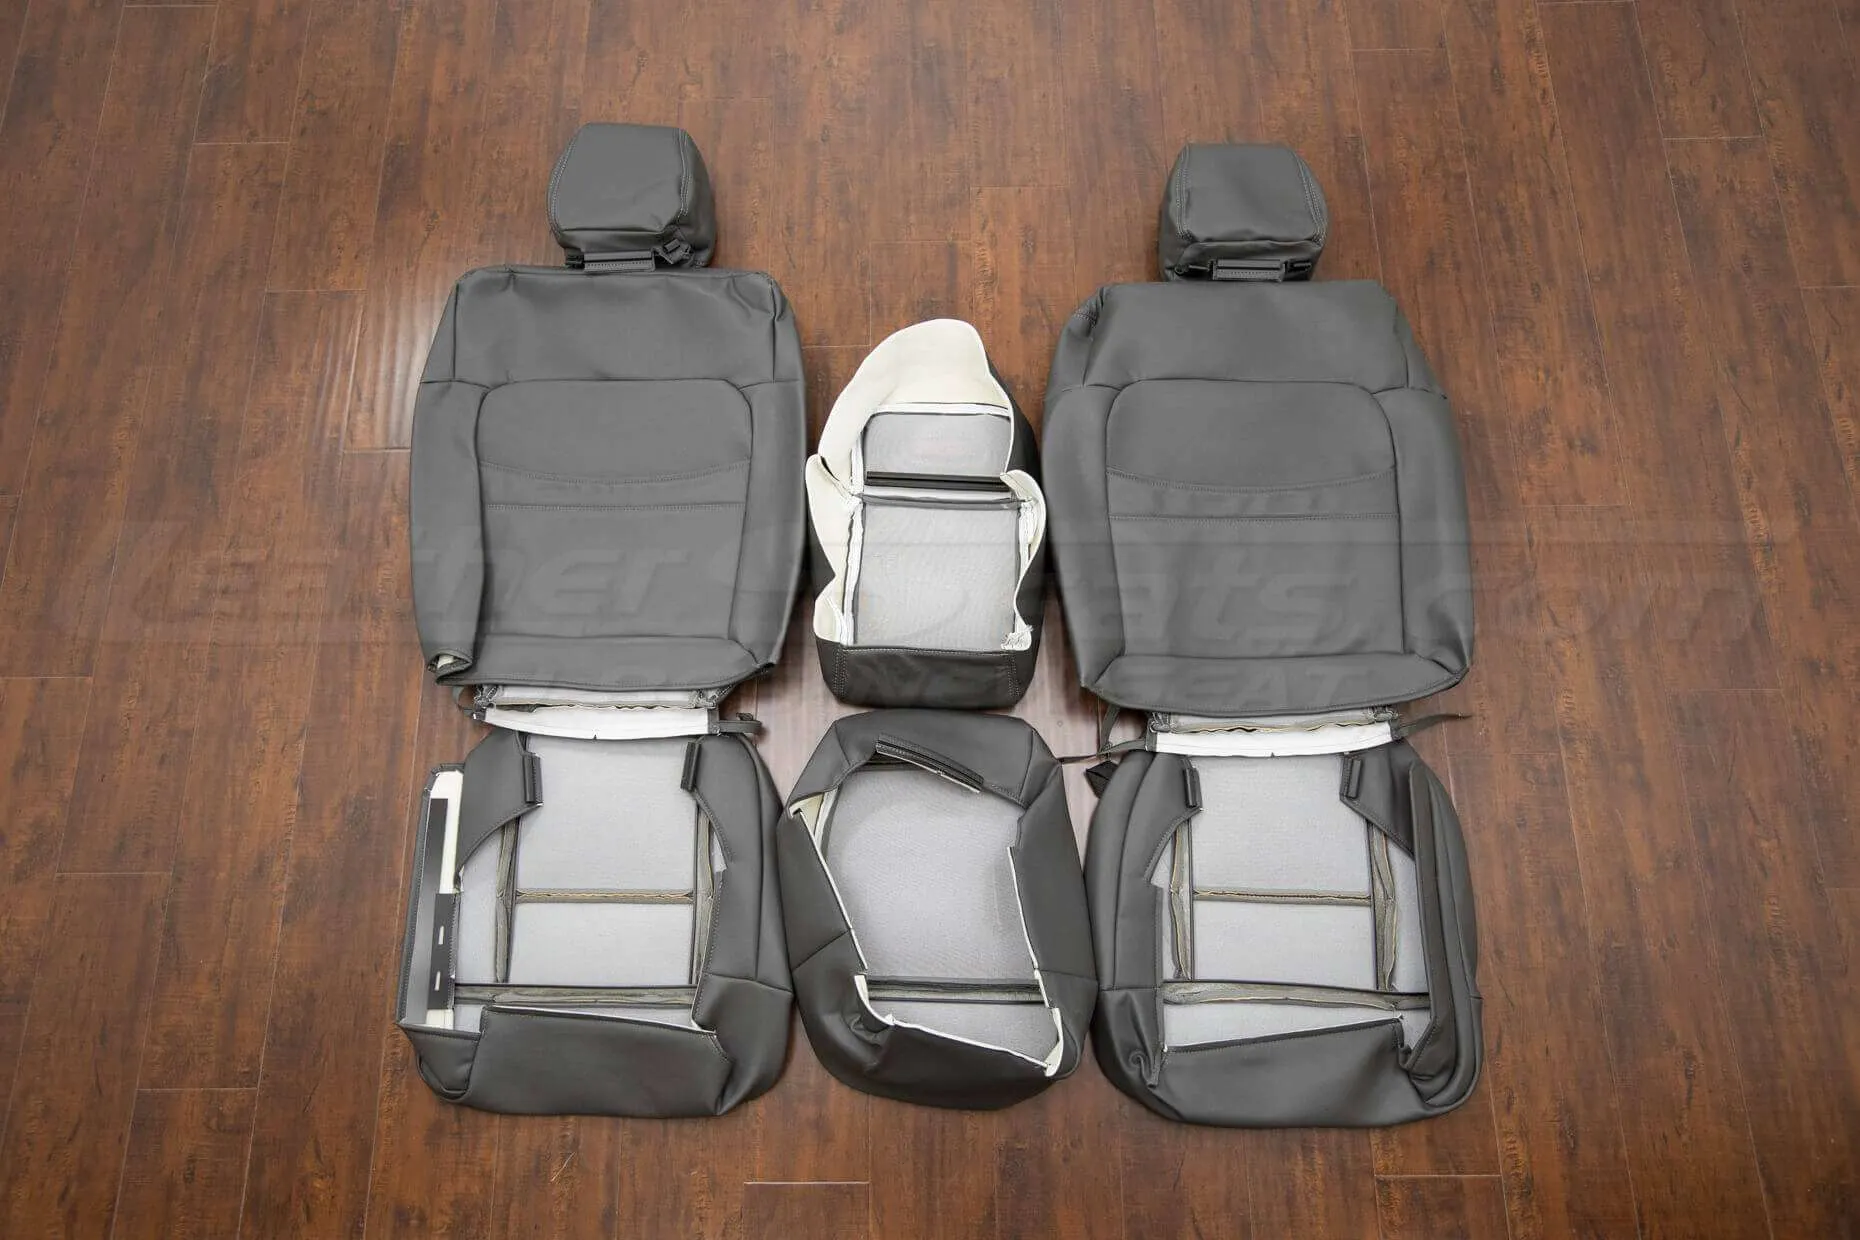 Ford F-150 Upholstery Kit - Graphite & Stone - Back of front seats